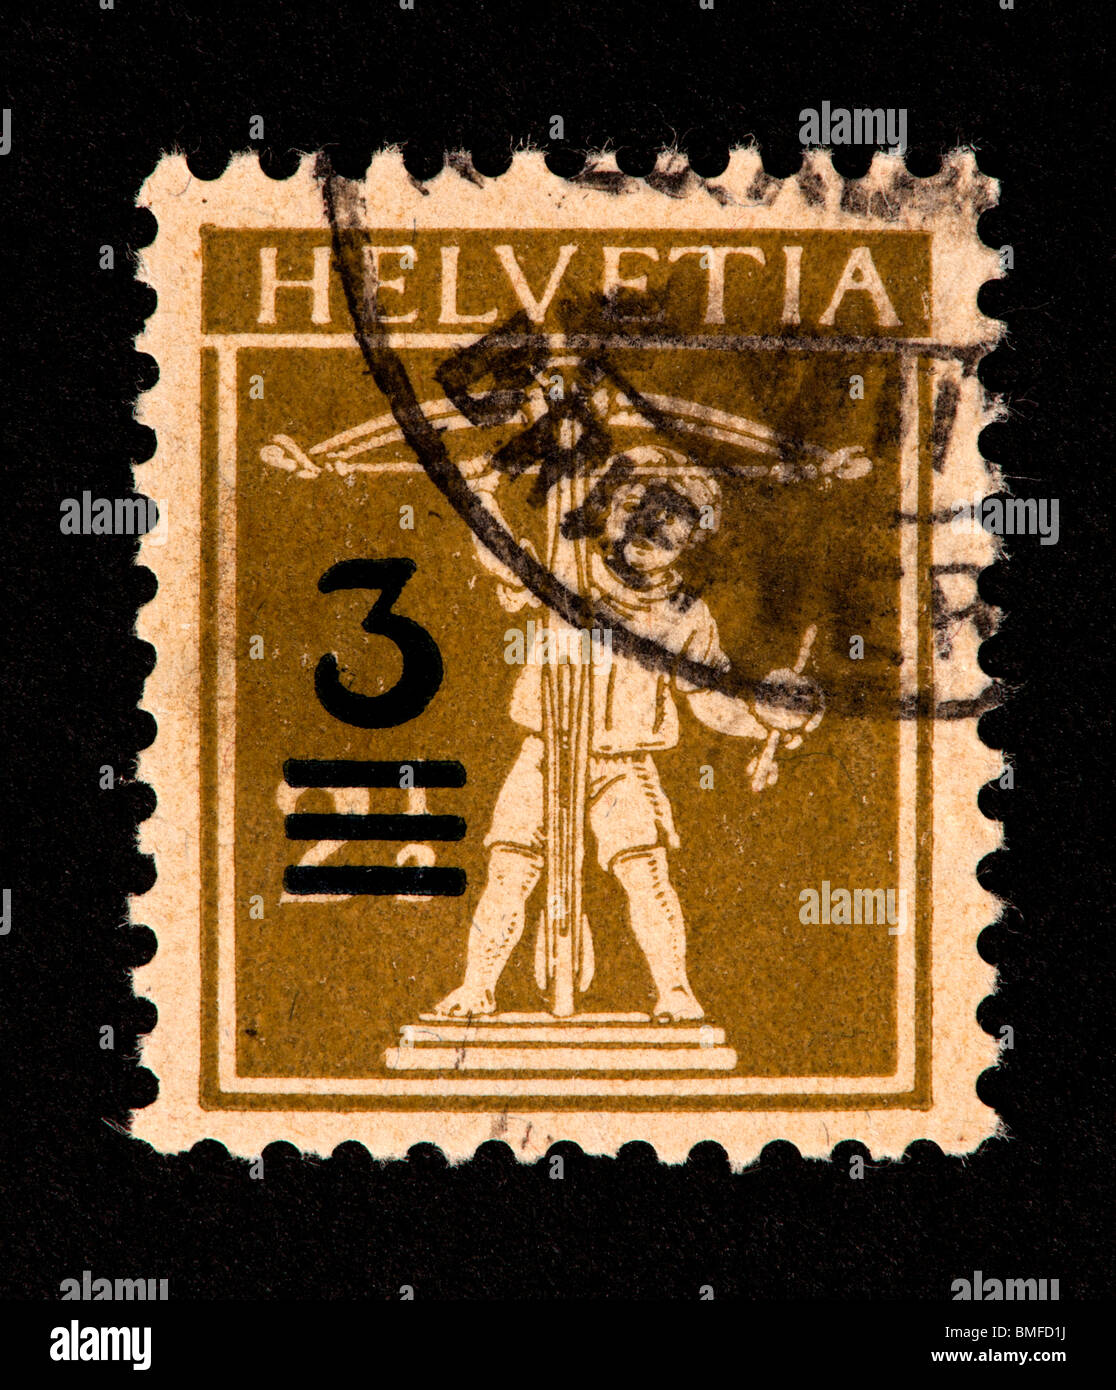 Postage stamp from Switzerland depicting William Tell's son. Stock Photo